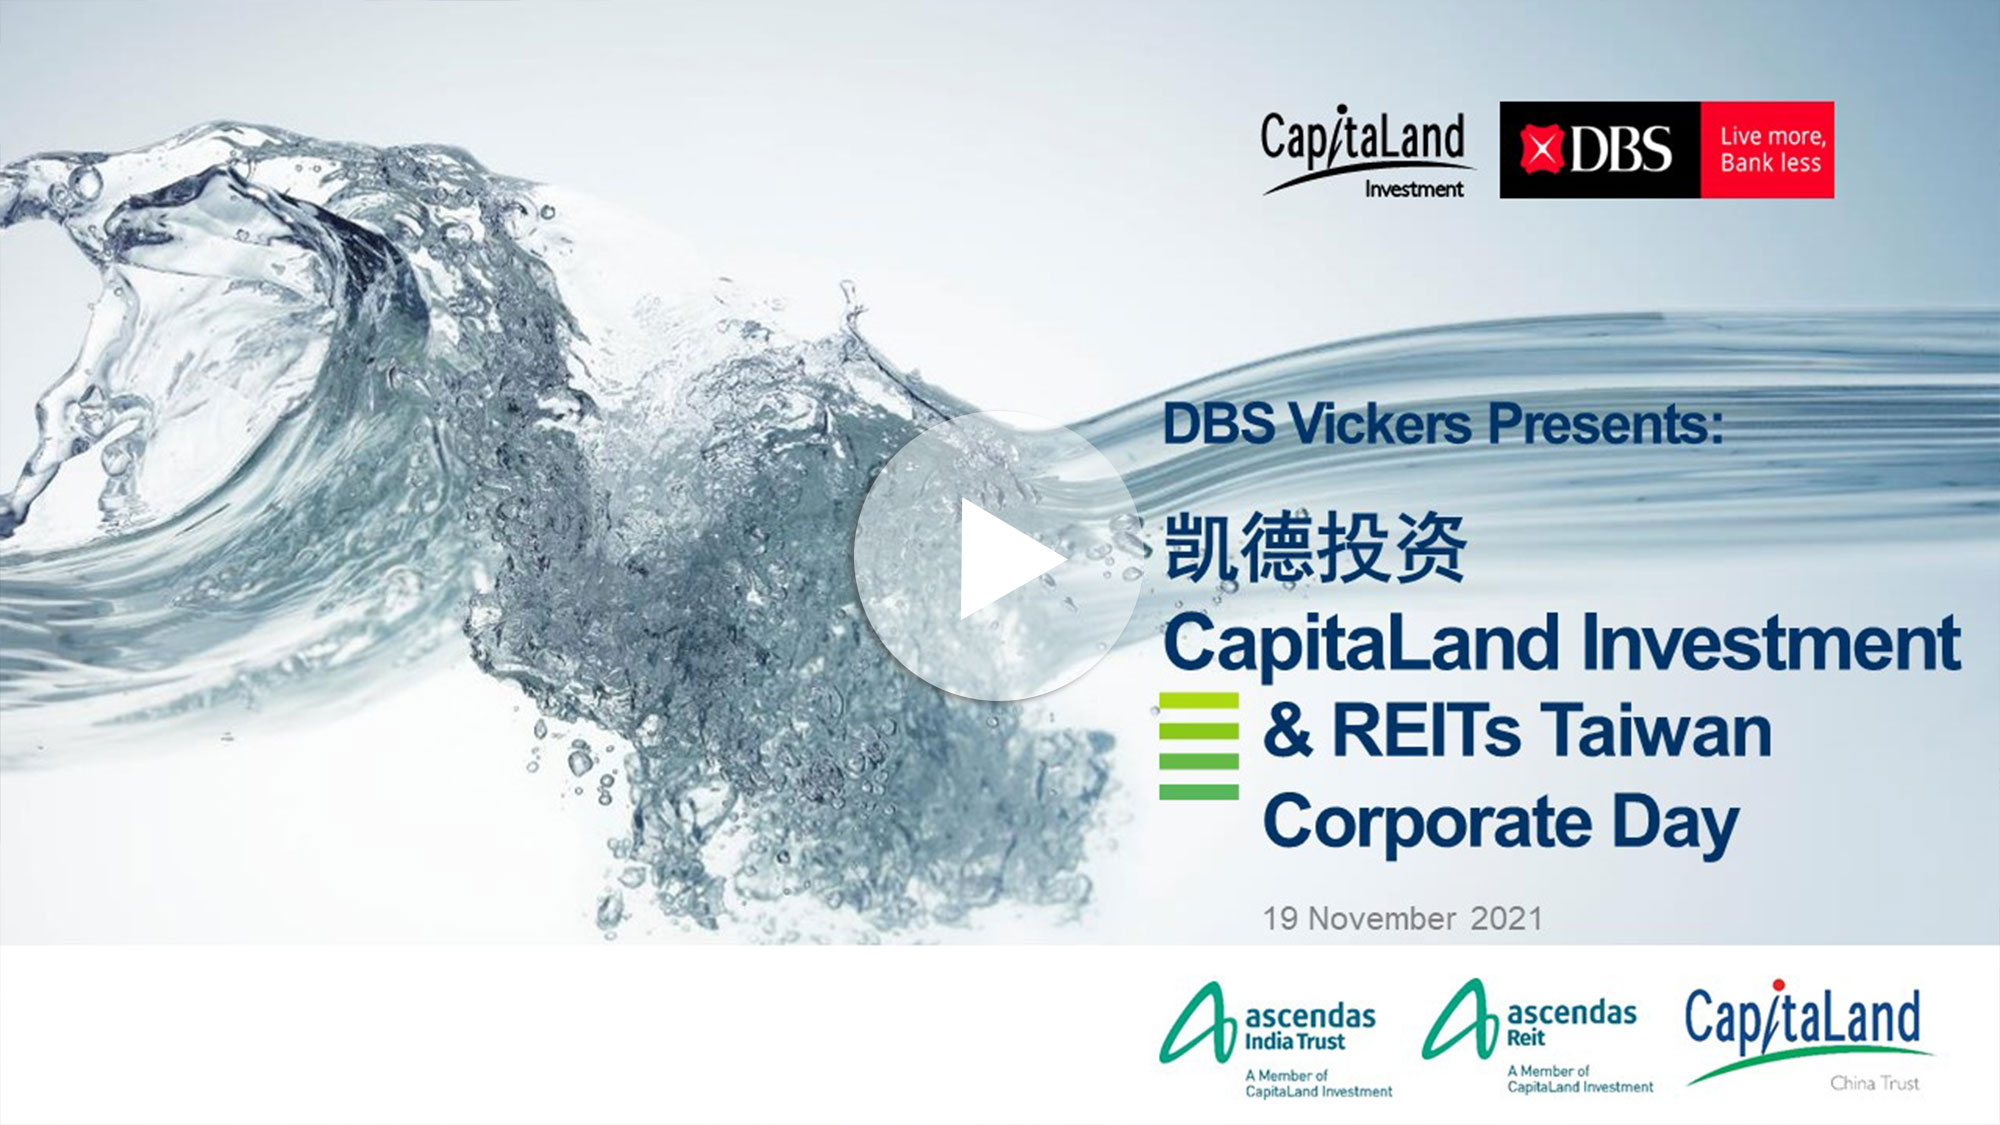 CapitaLand Investment & REITs Taiwan Corporate Day - Session 2